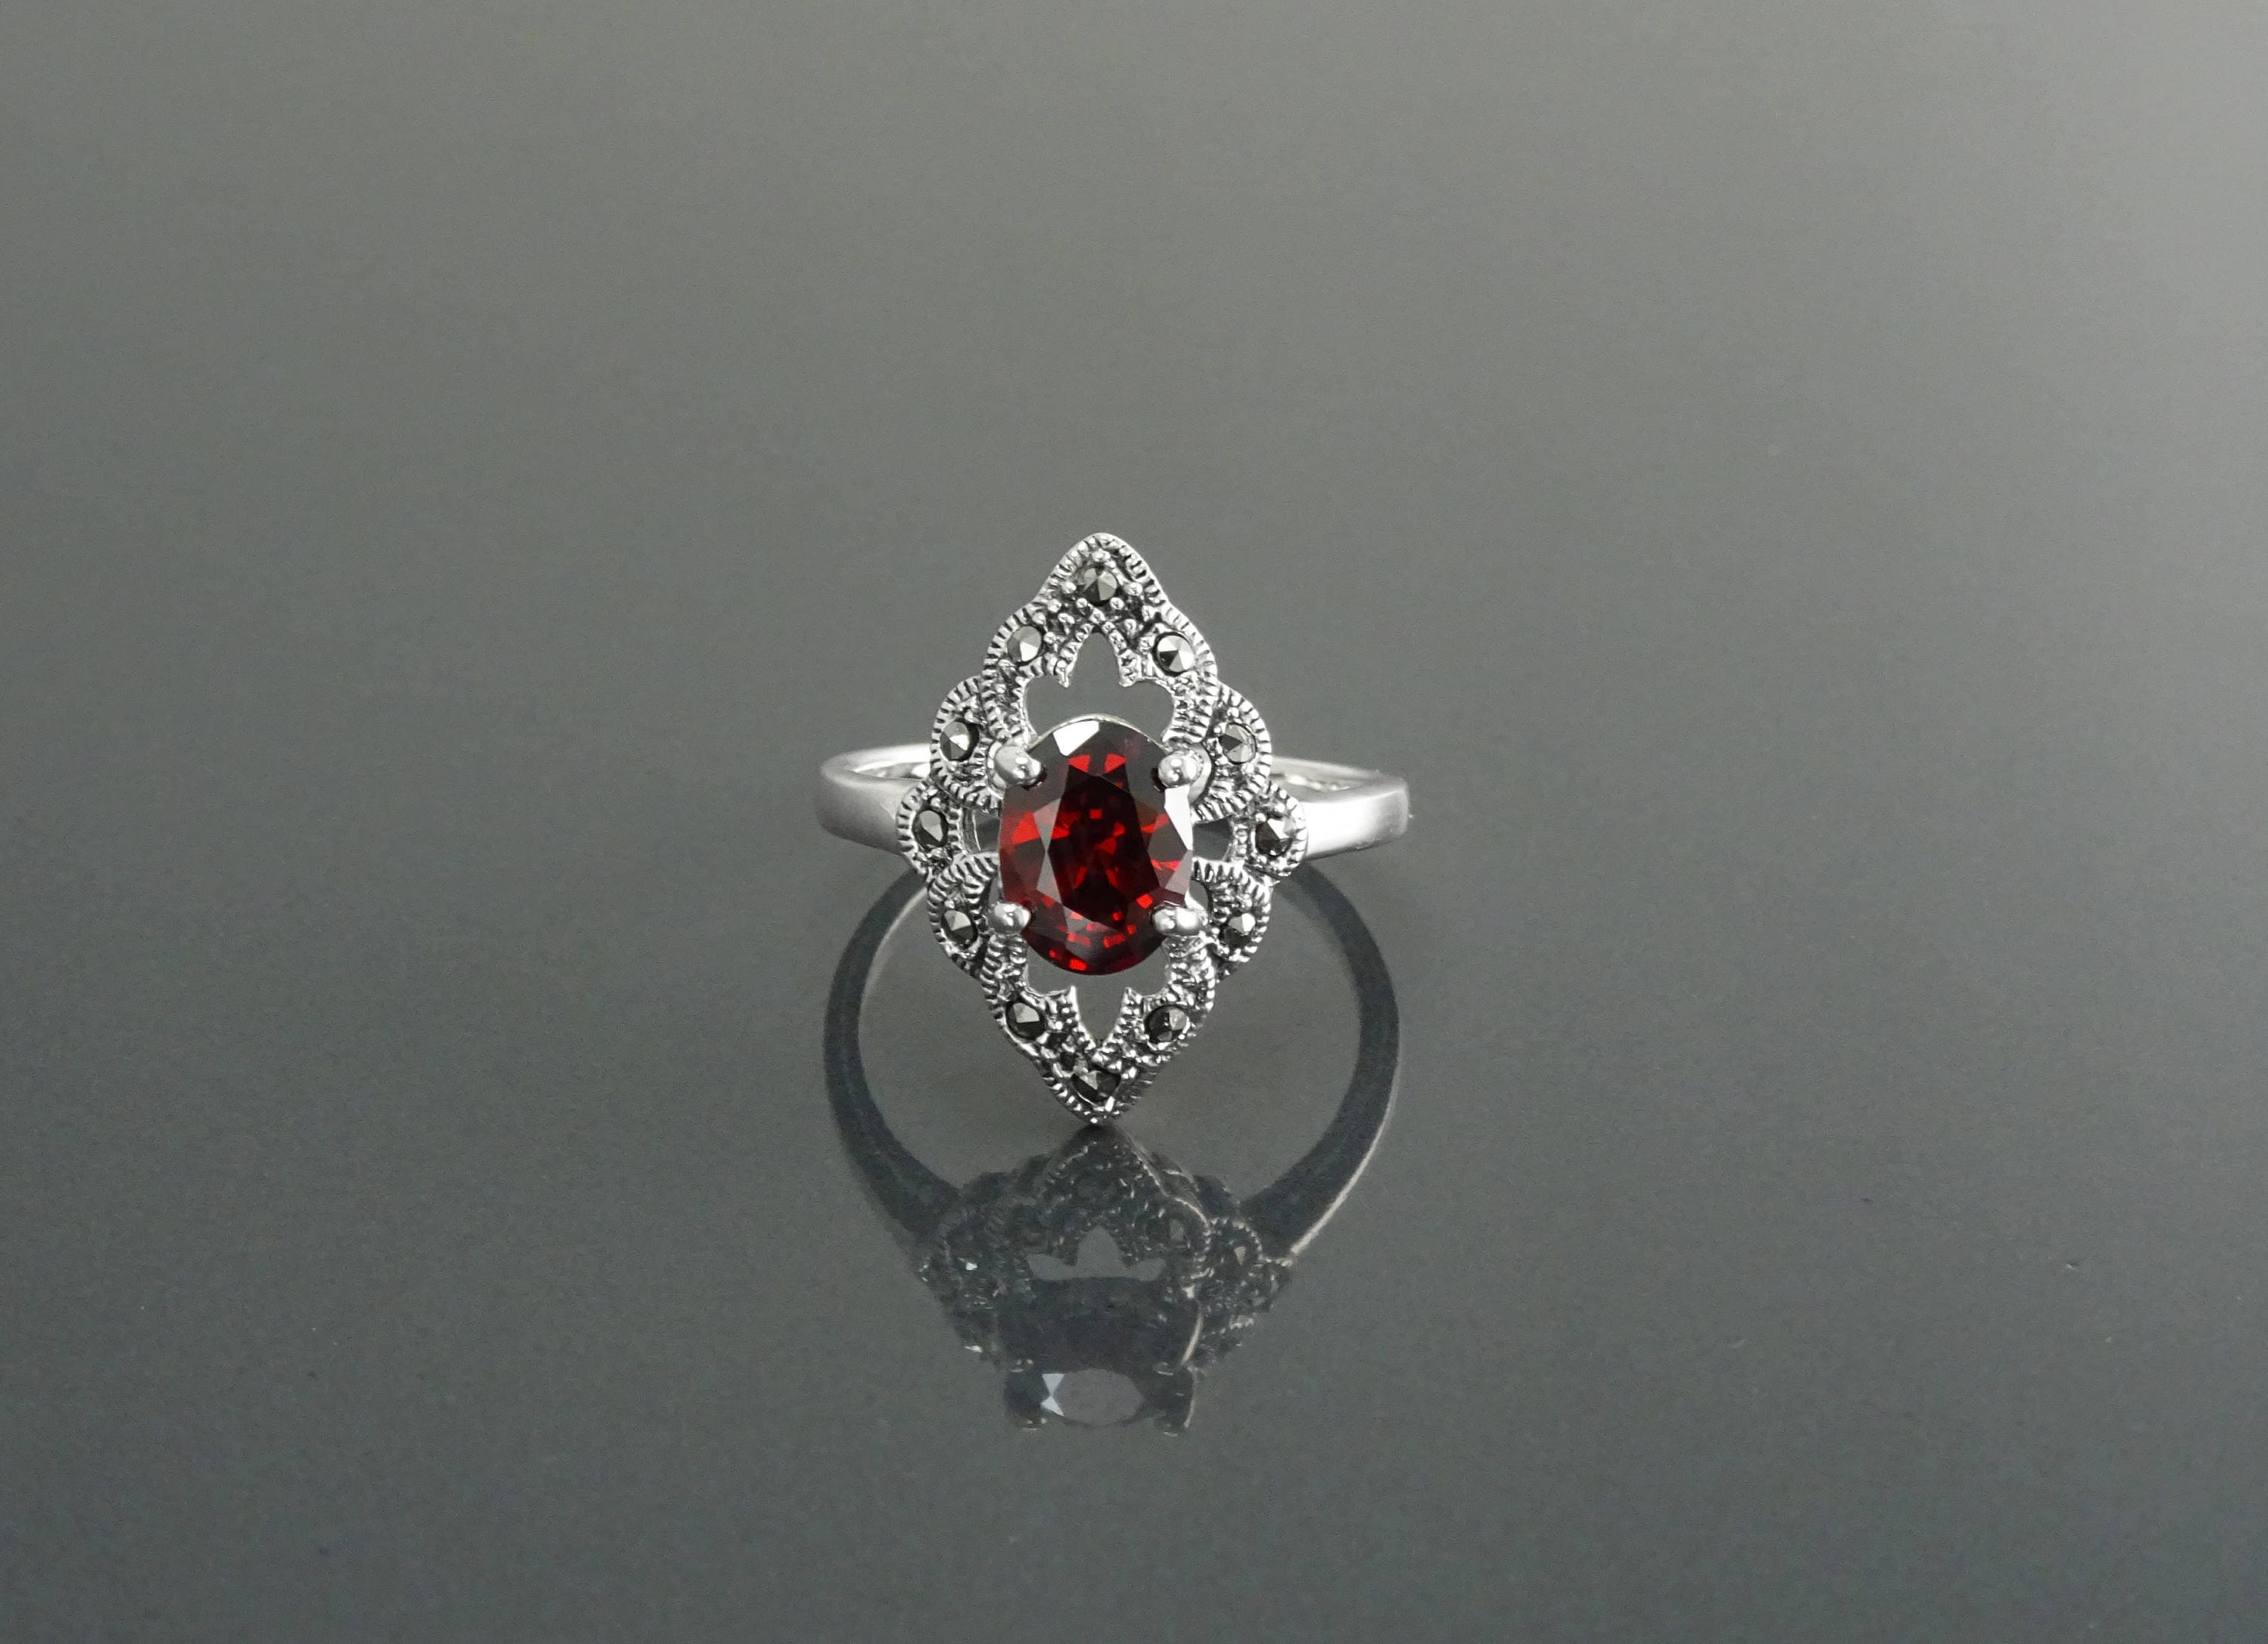 CaratYogi Marquise Shape Natural Garnet Silver Rings for Women Handcrafted Healling Size 6 7 8 9 10 11